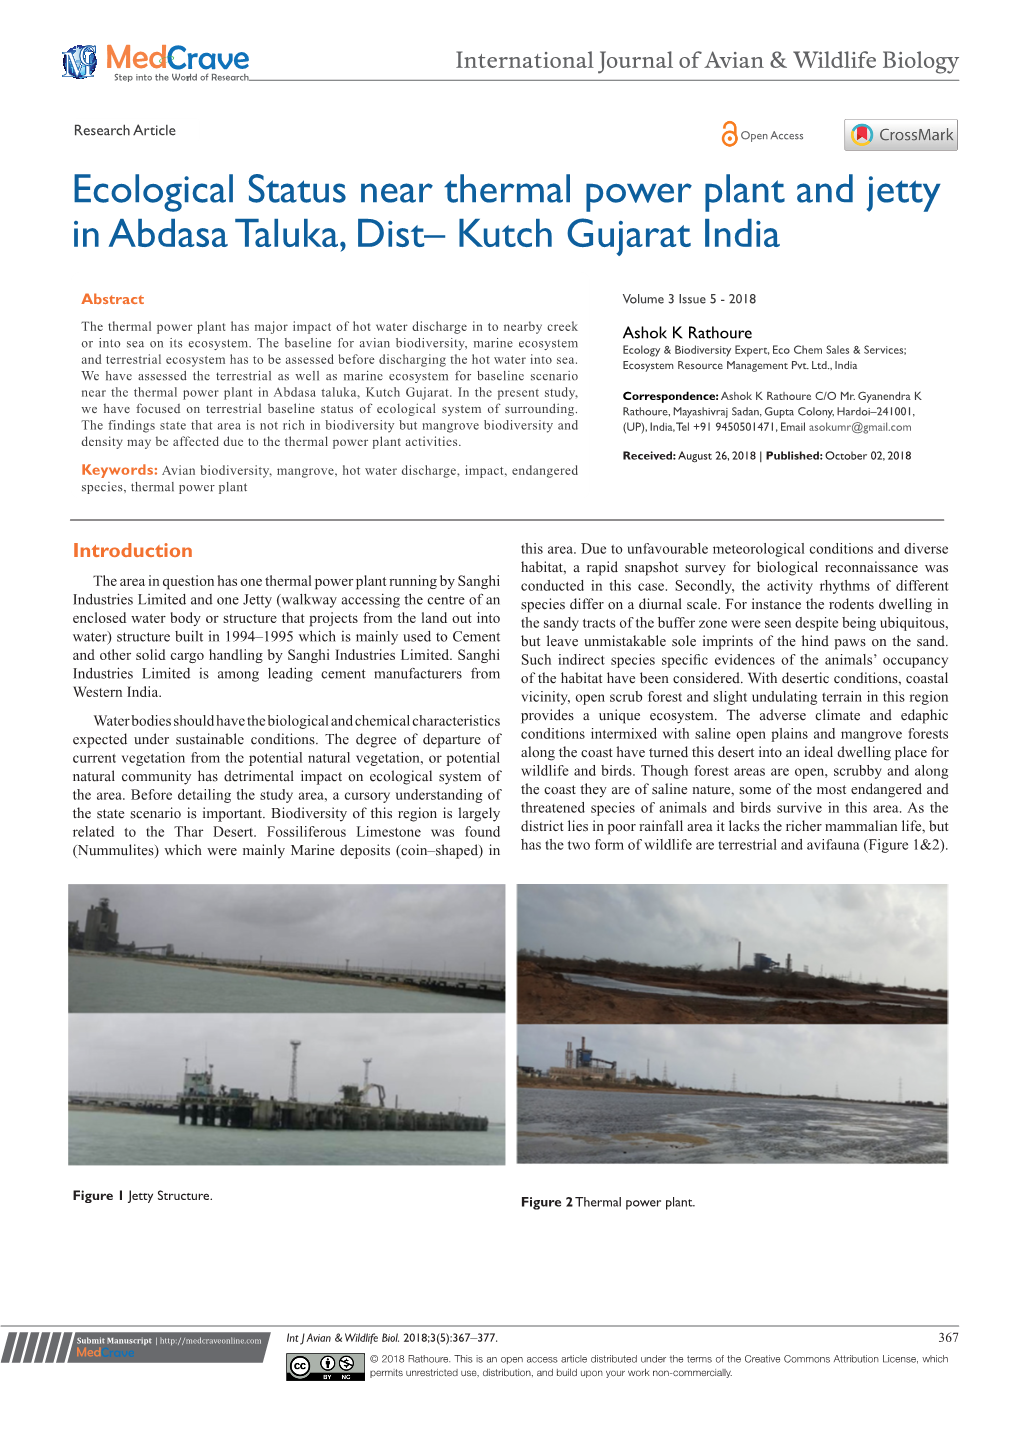 Ecological Status Near Thermal Power Plant and Jetty in Abdasa Taluka, Dist– Kutch Gujarat India